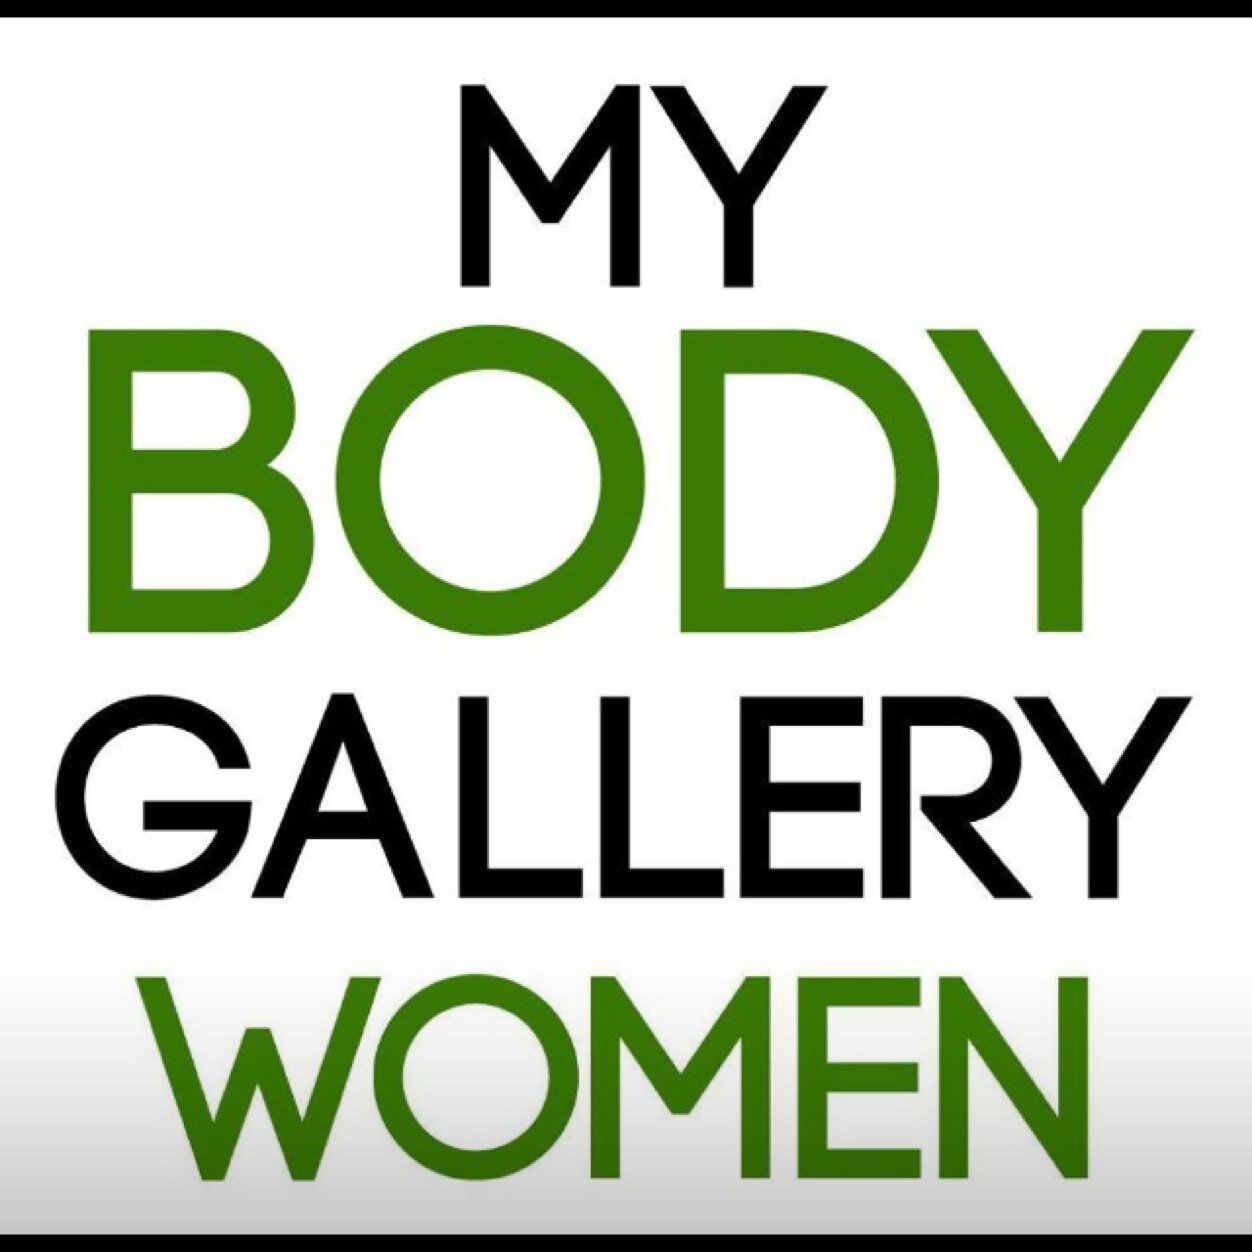 Over 50,000 crowdsourced #bodypositive images! Upload your photos today or tell us your body story. The official Twitter page of https://t.co/kqOxFGQAH7.